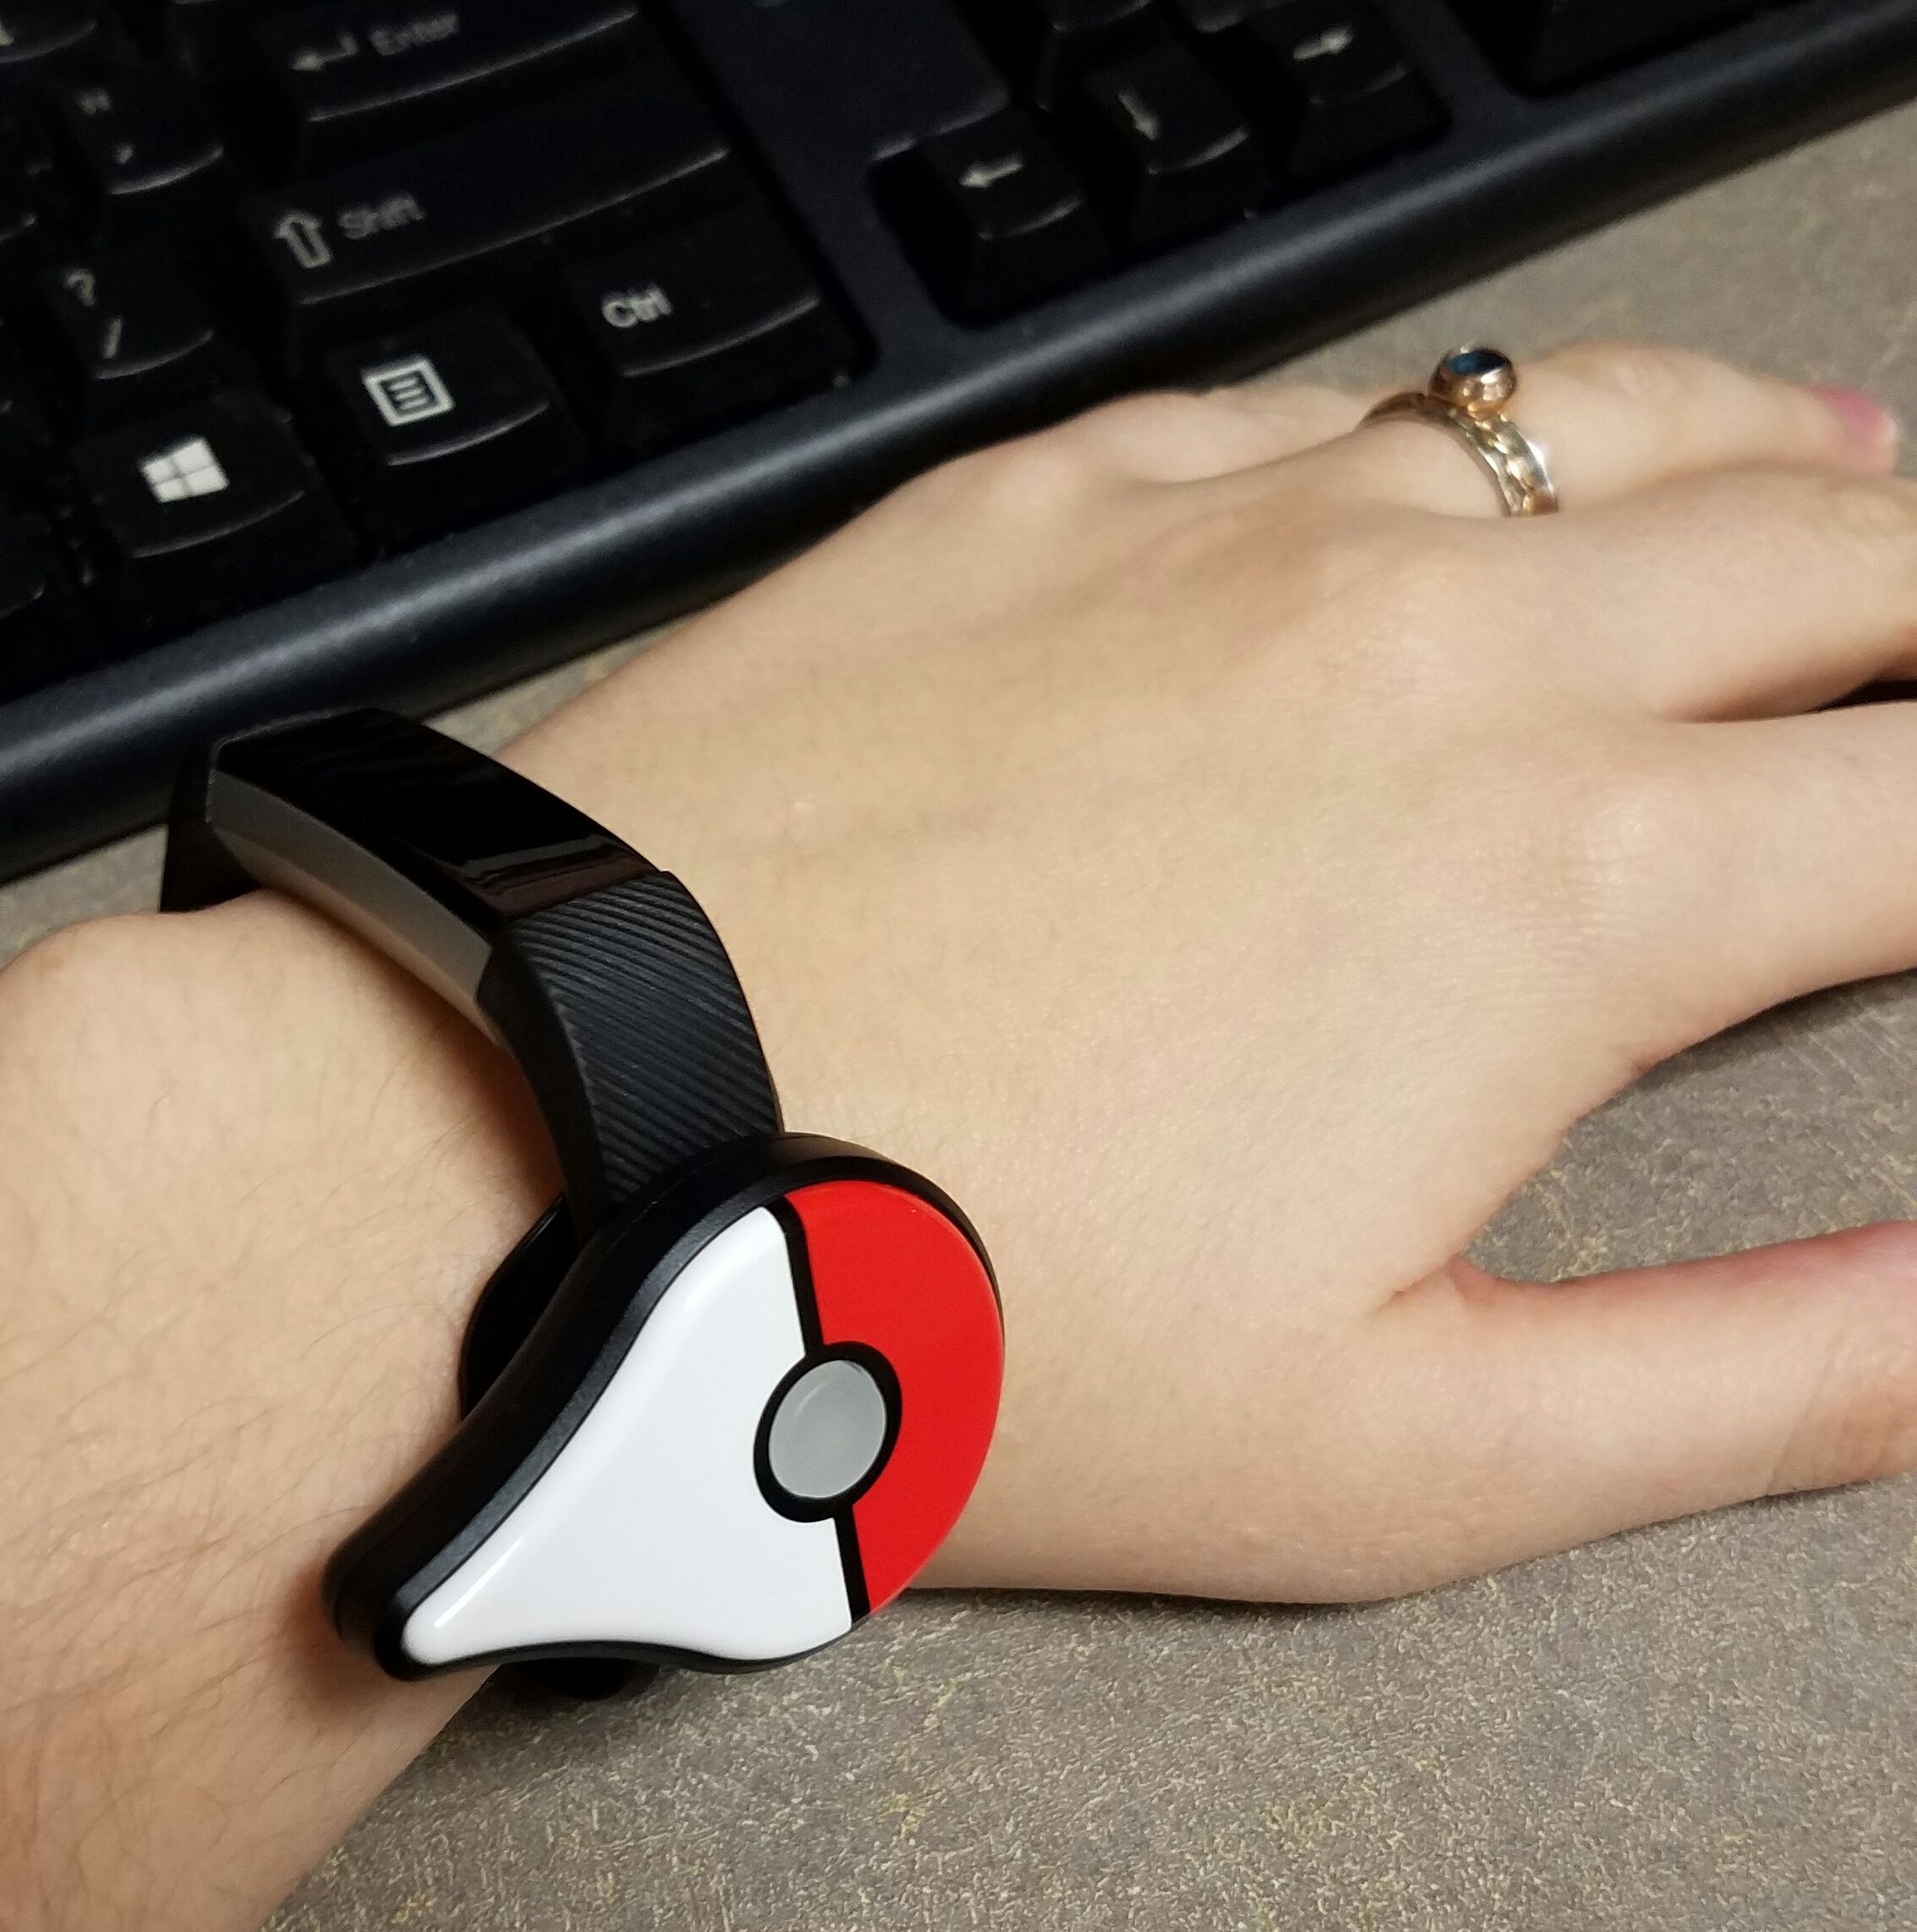 pokemon go sync with fitbit